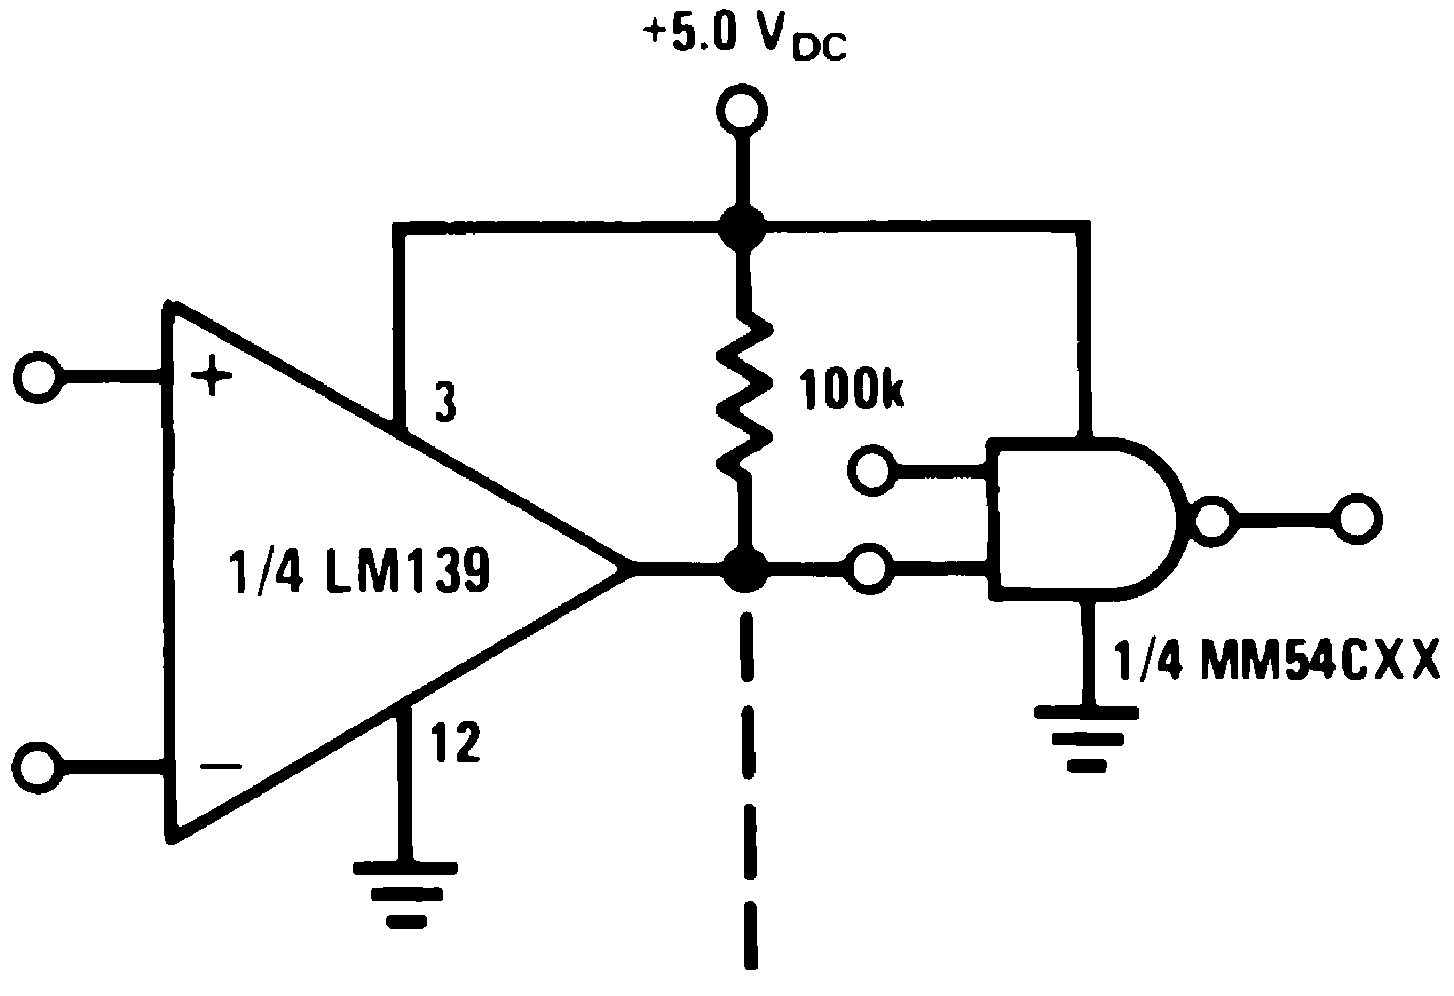 LM339-MIL lm339-mil-driving-cmos-schematic.png